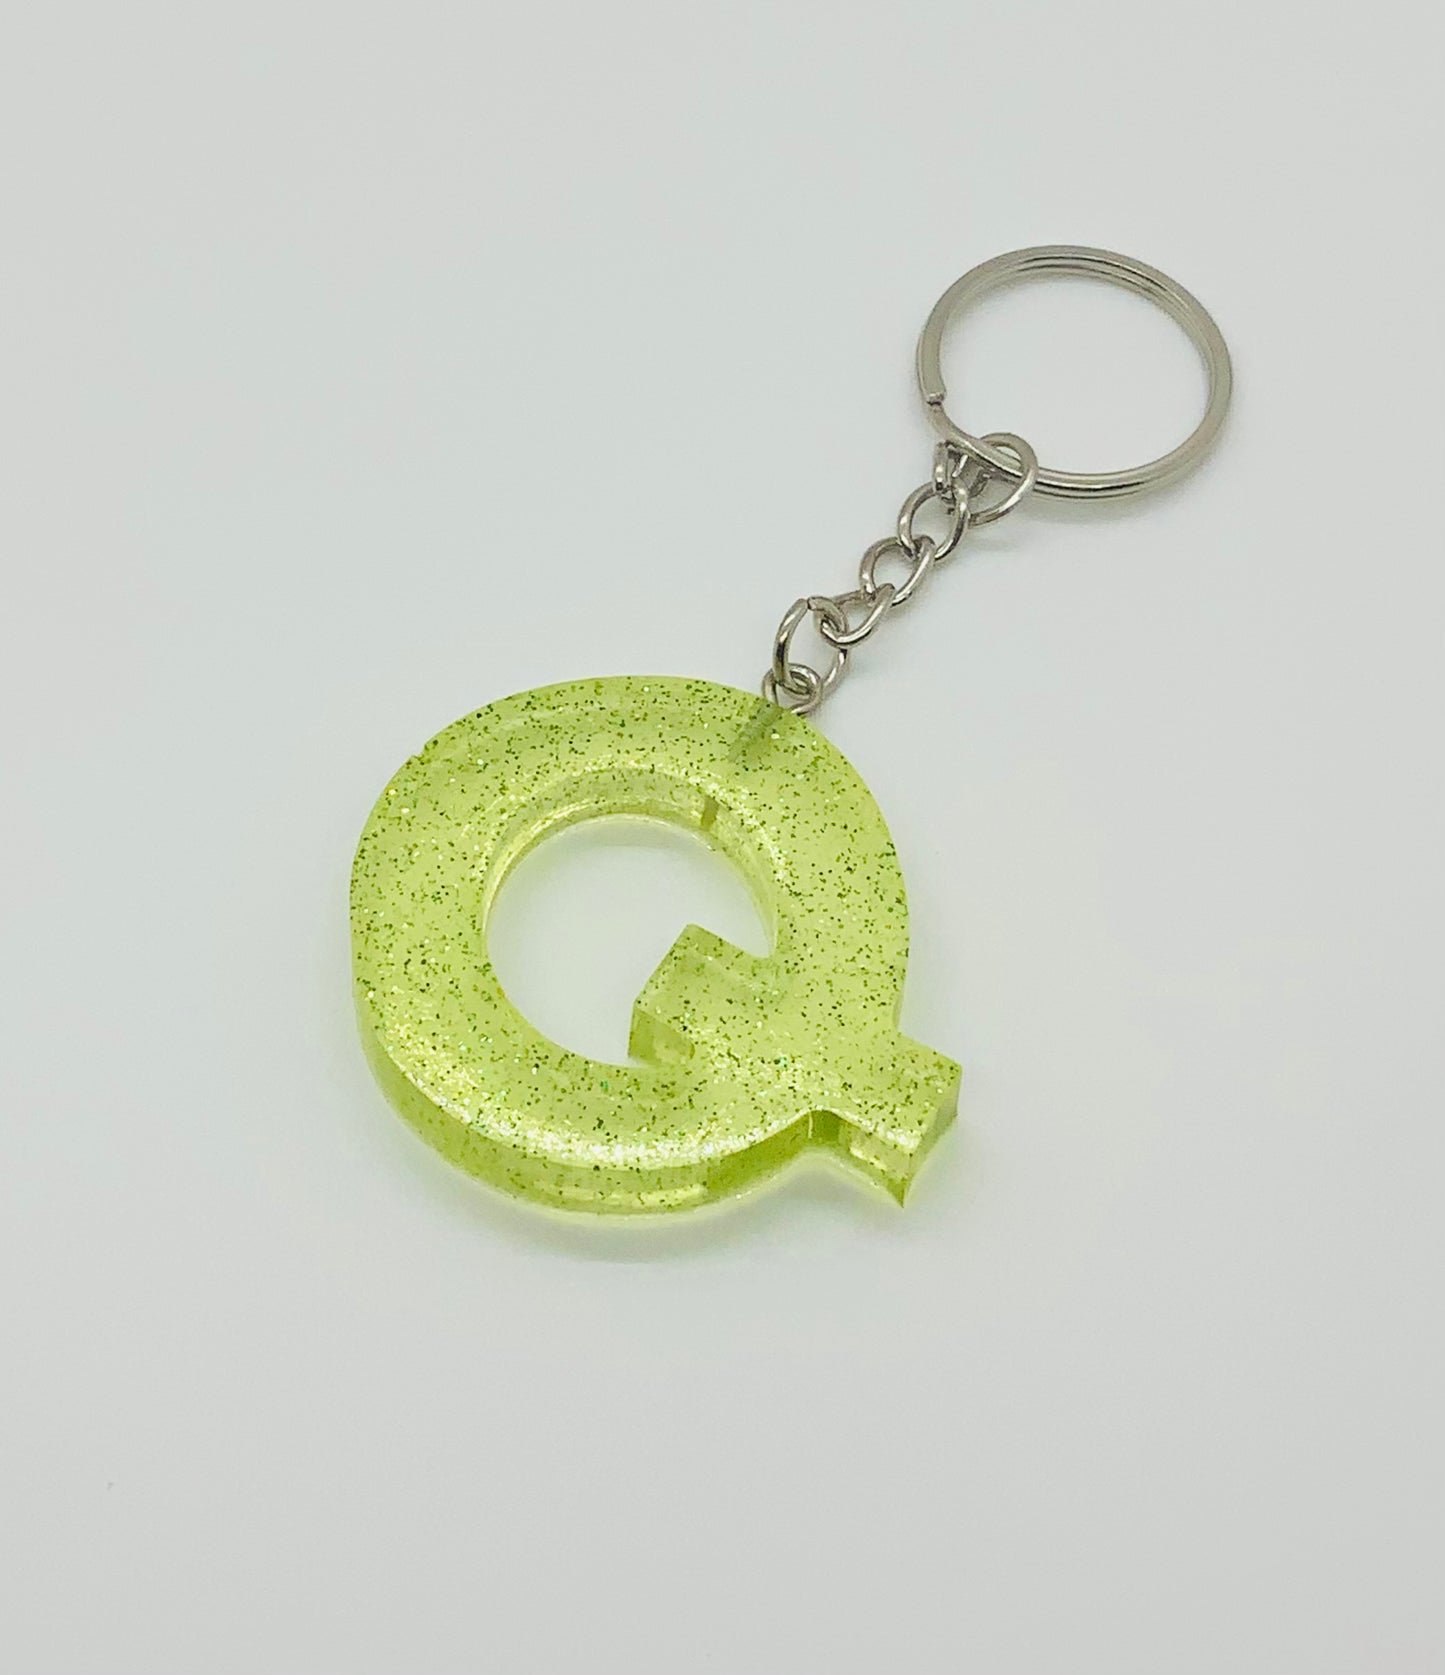 The Letter "Q" Keychain - BeautiesbyHand